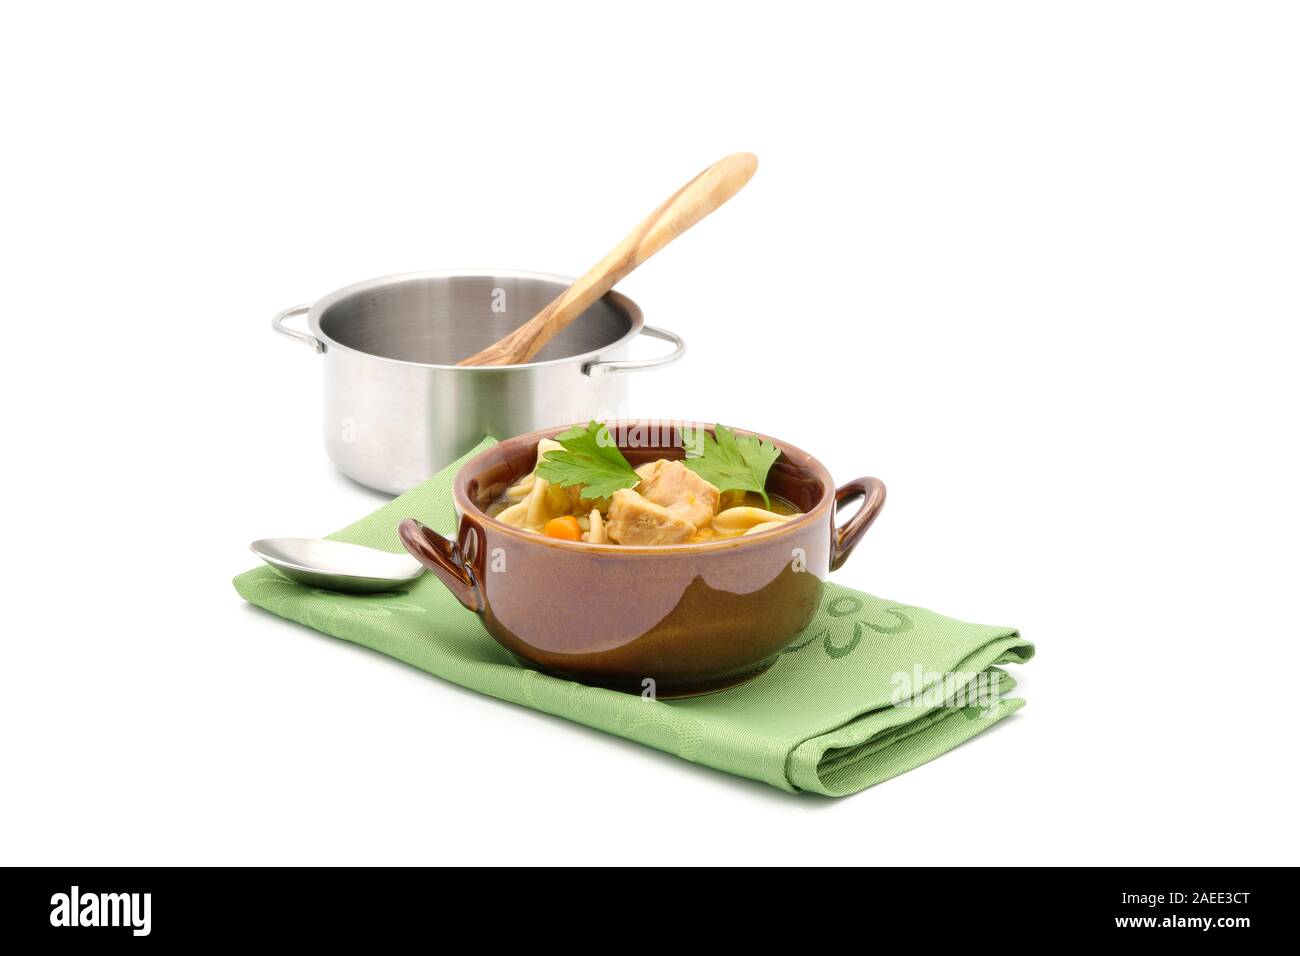 Bowl of Chicken noodle soup in a brown bowl sitting on a  green napkin photographed on a white background. Stock Photo